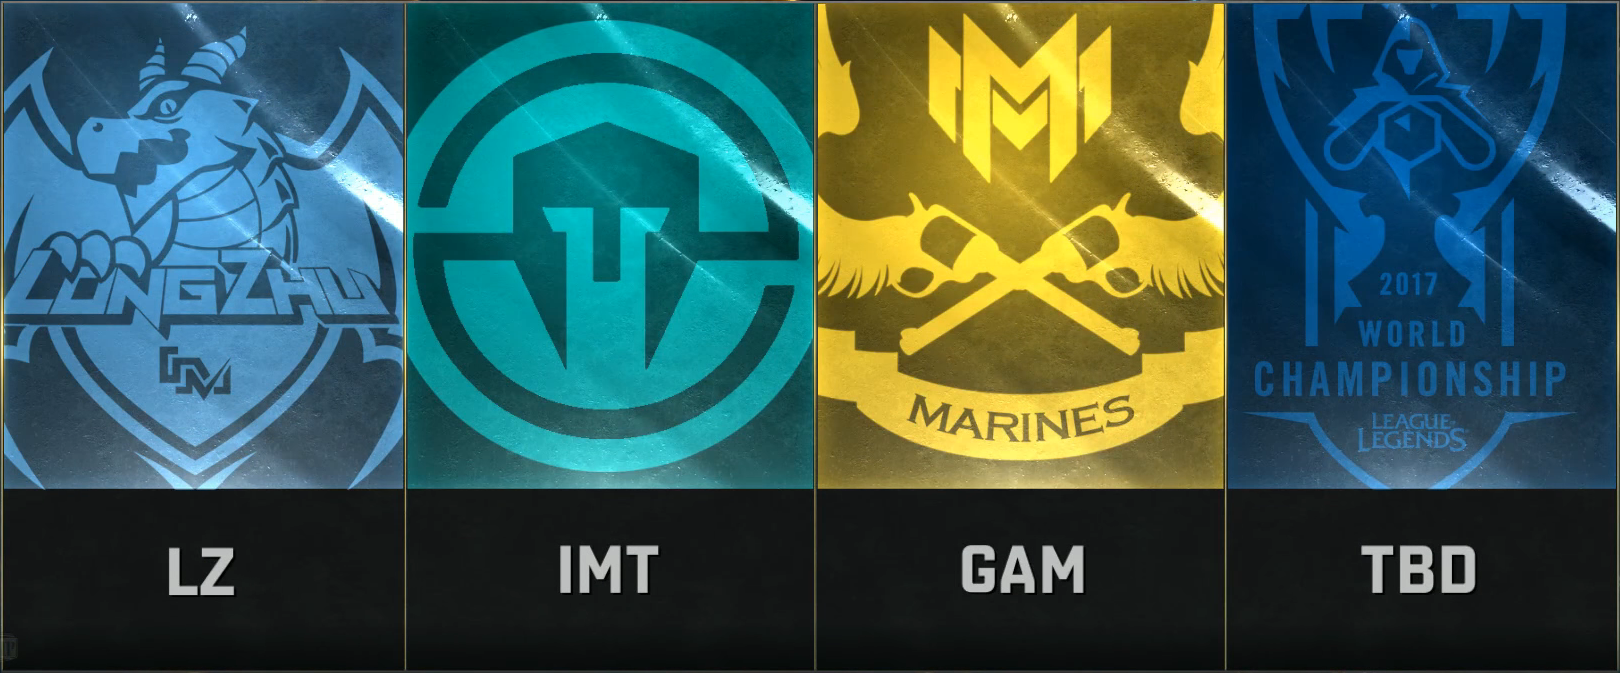 IMT group stage